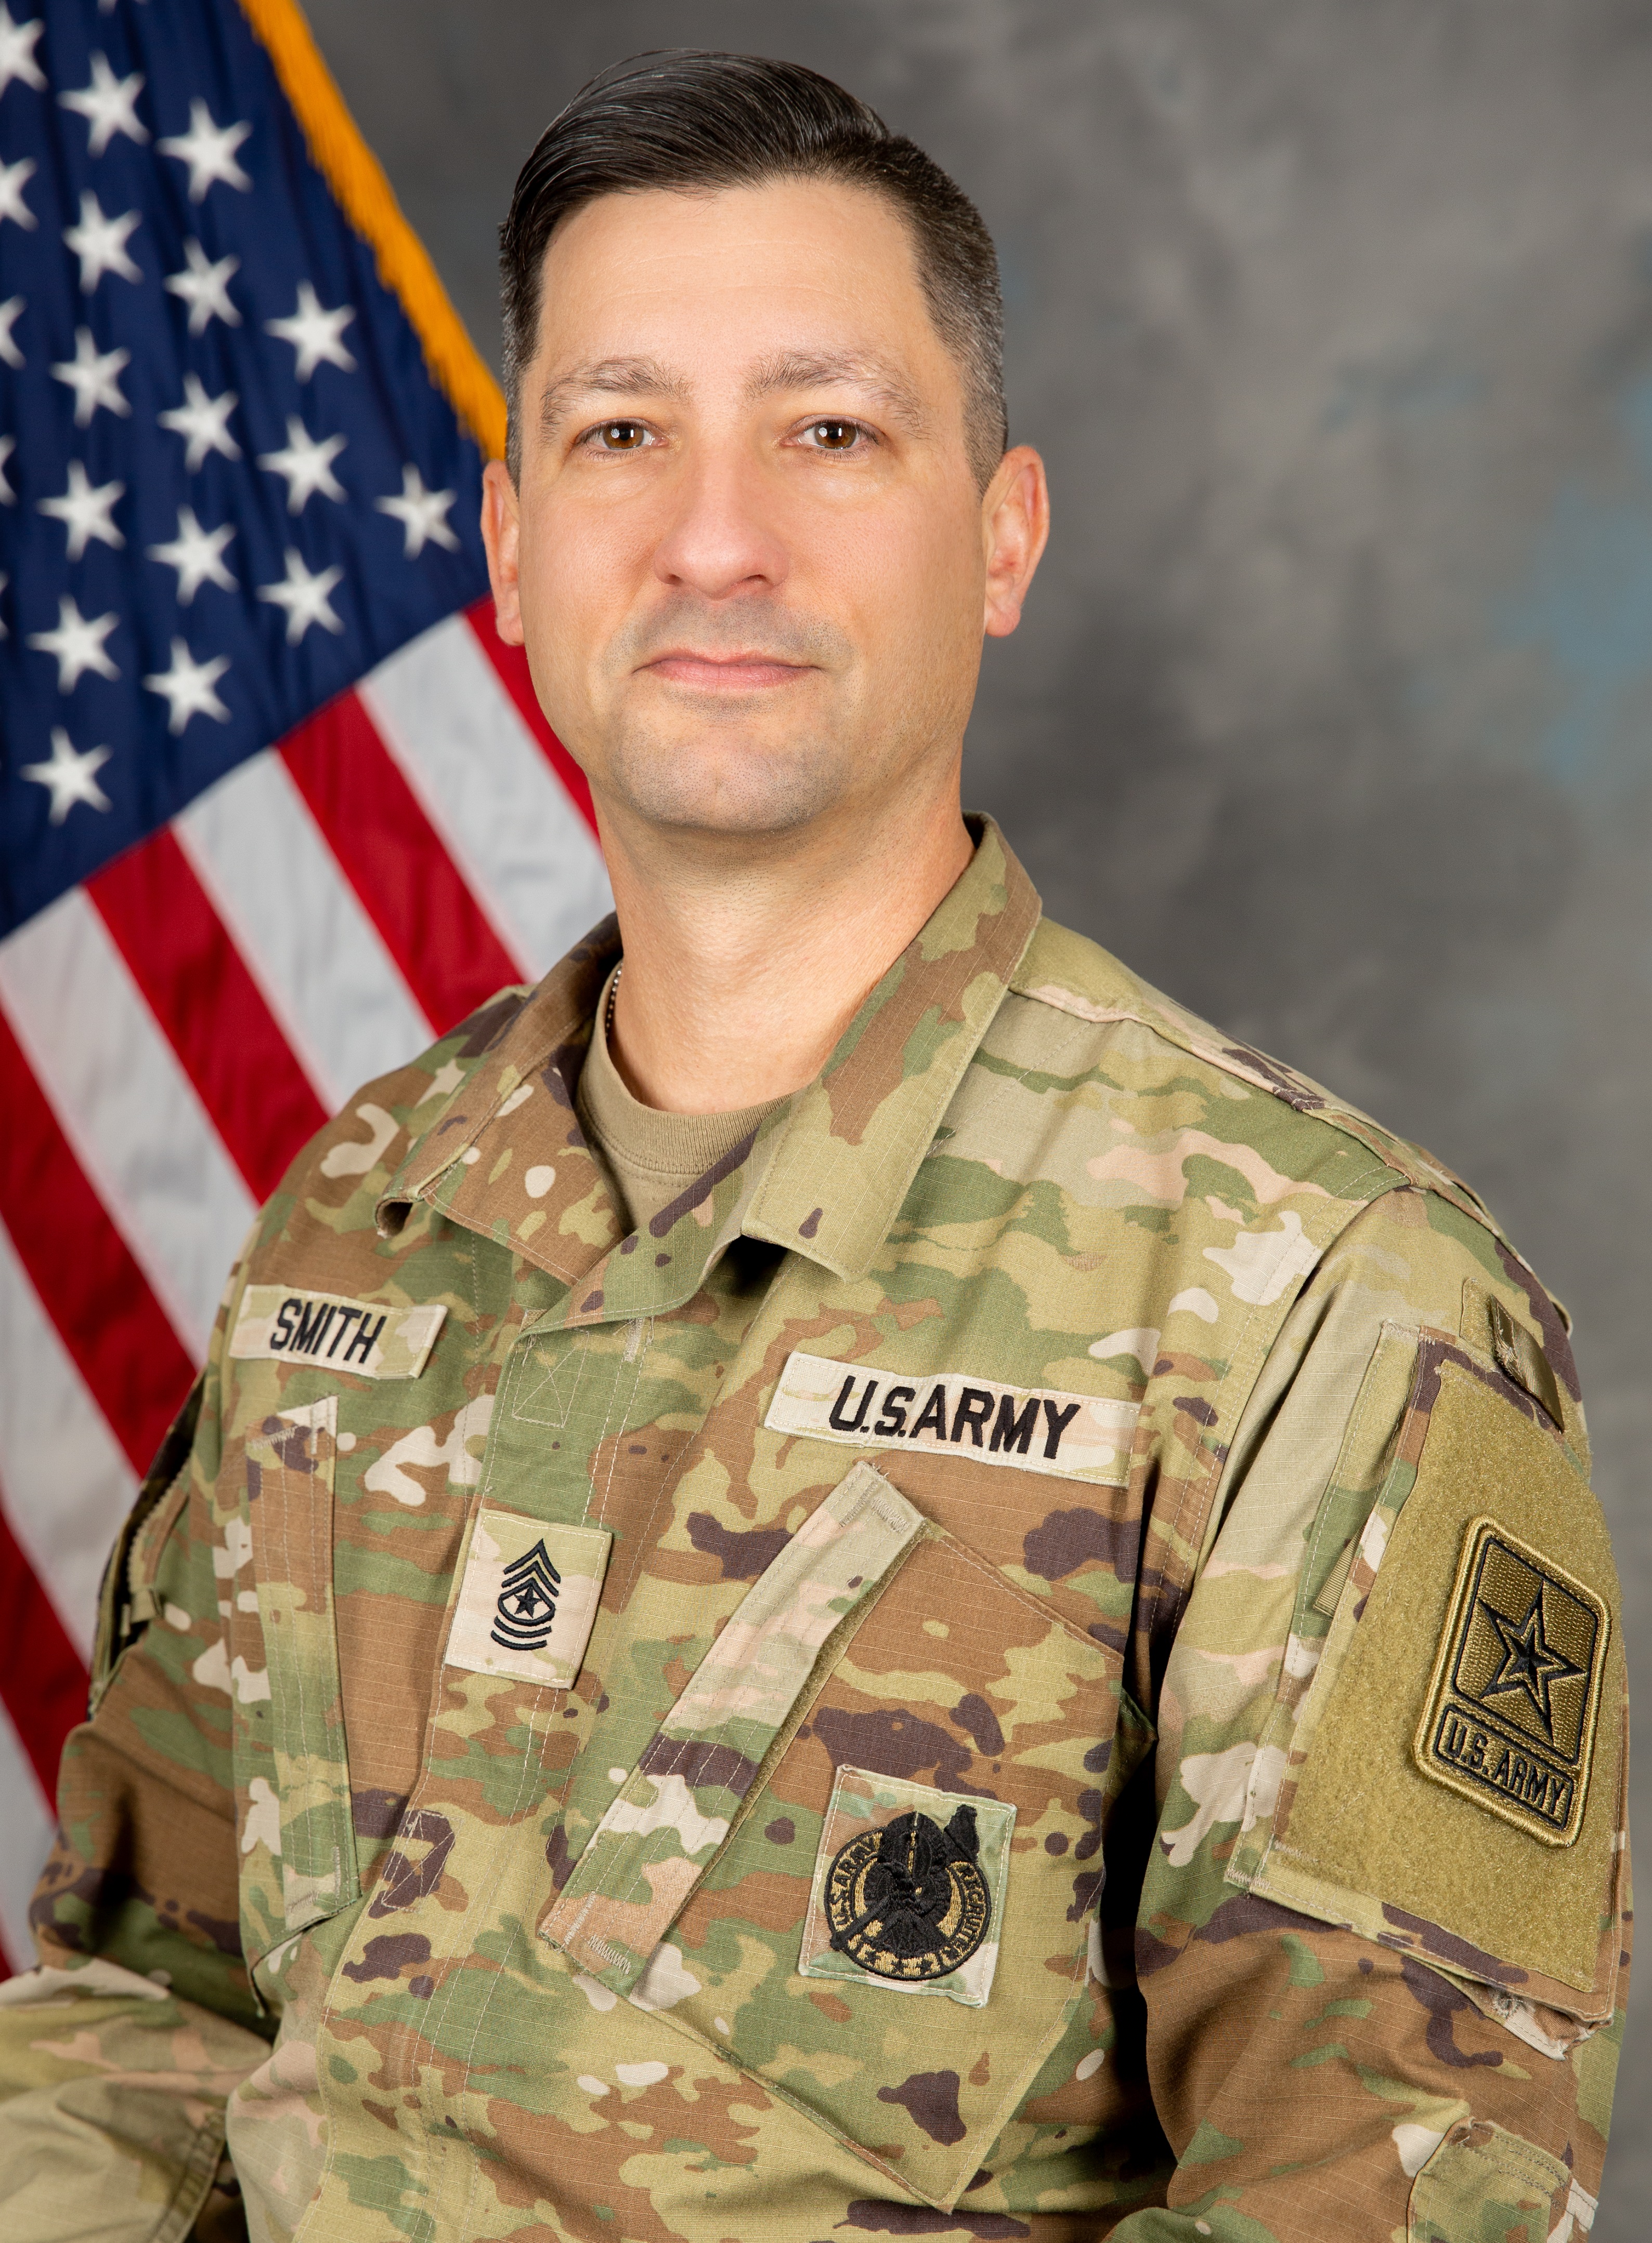 Official headshot of SGM Paul J. Smith